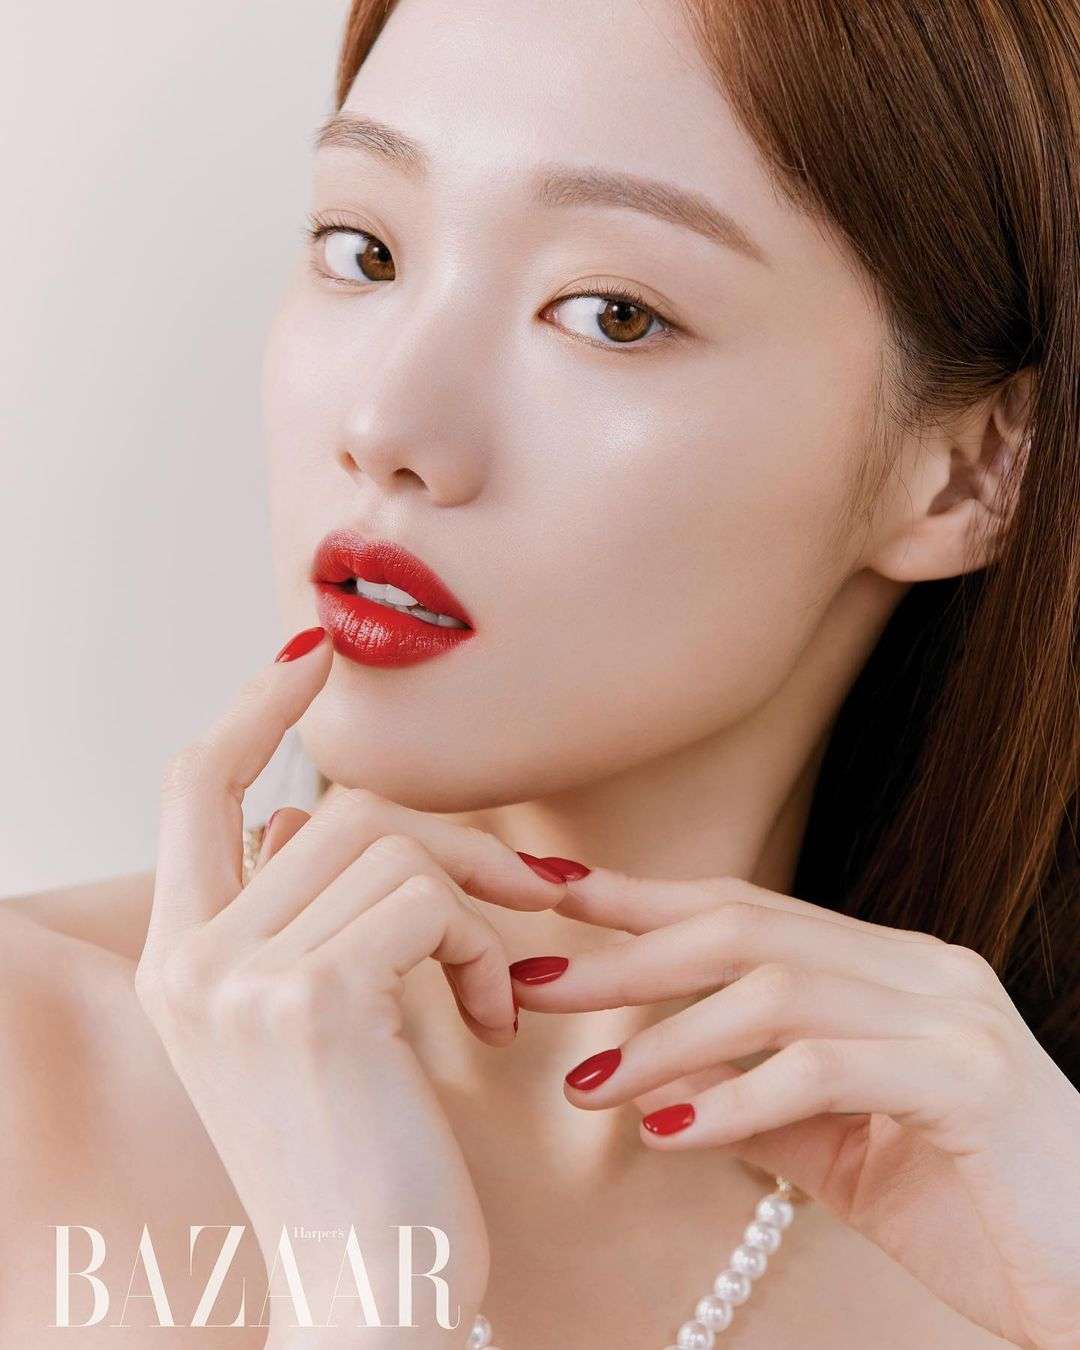 Lee Sung Kyung - Biography, Profile, Facts, and Career